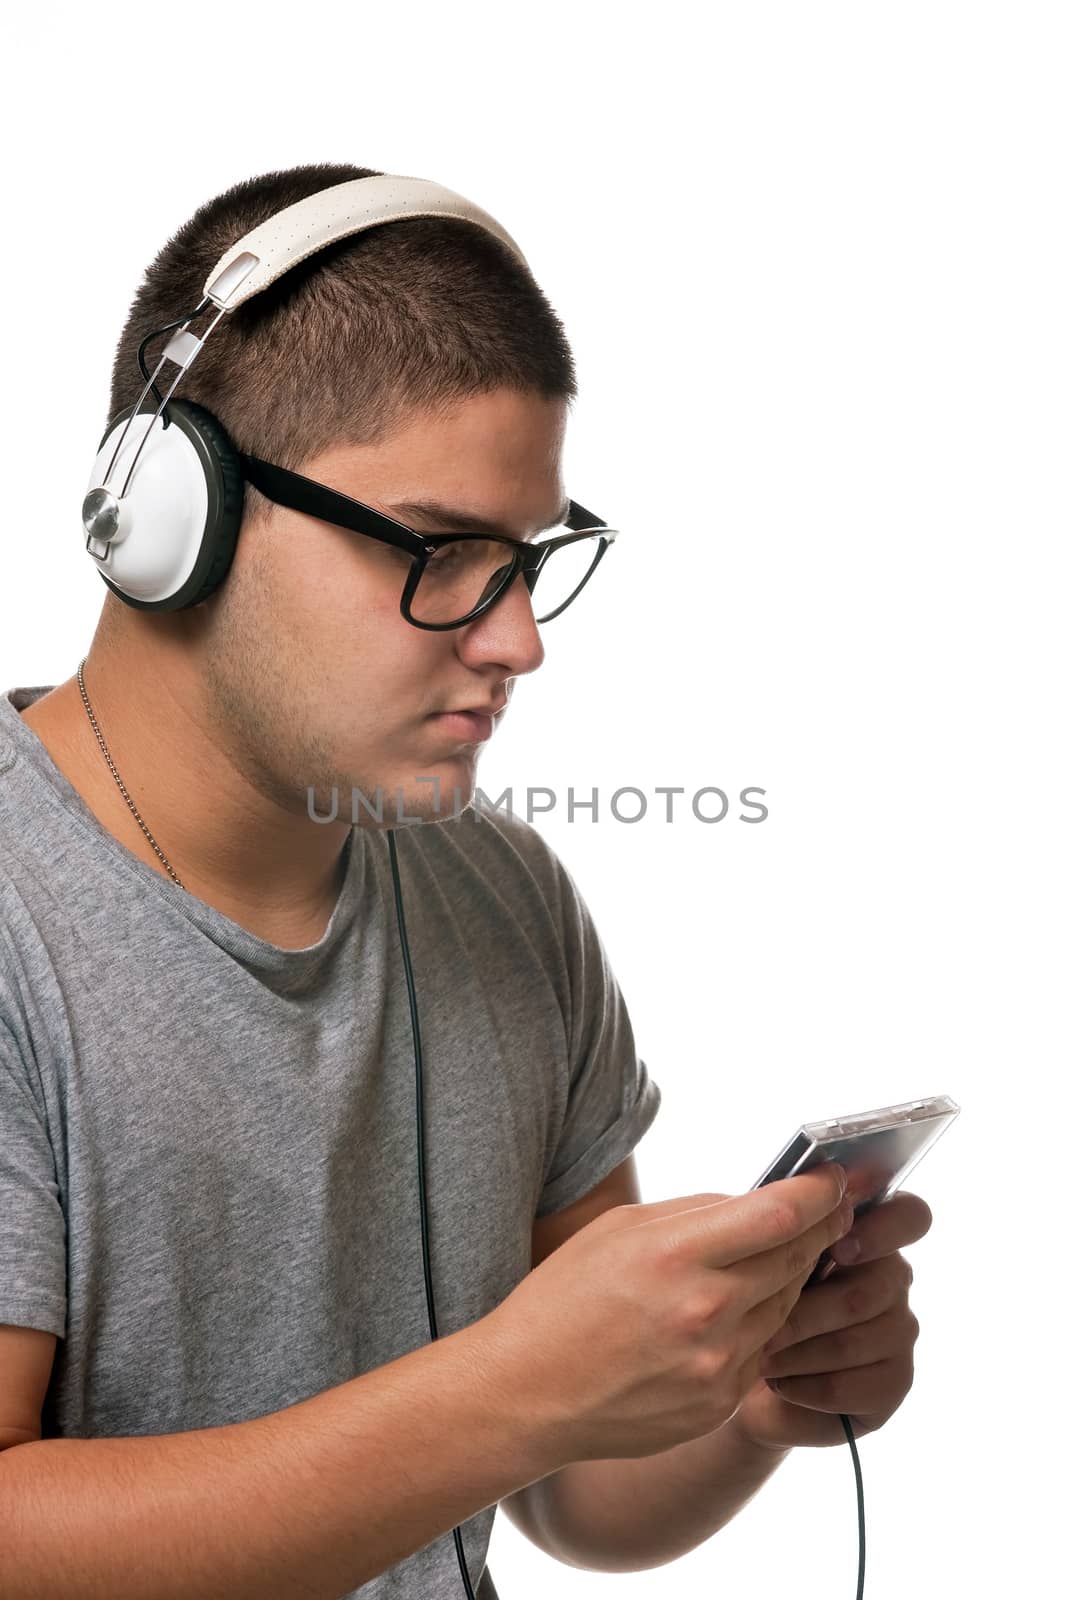 A young man listens to music with a set of head phones while examining the album cd case.